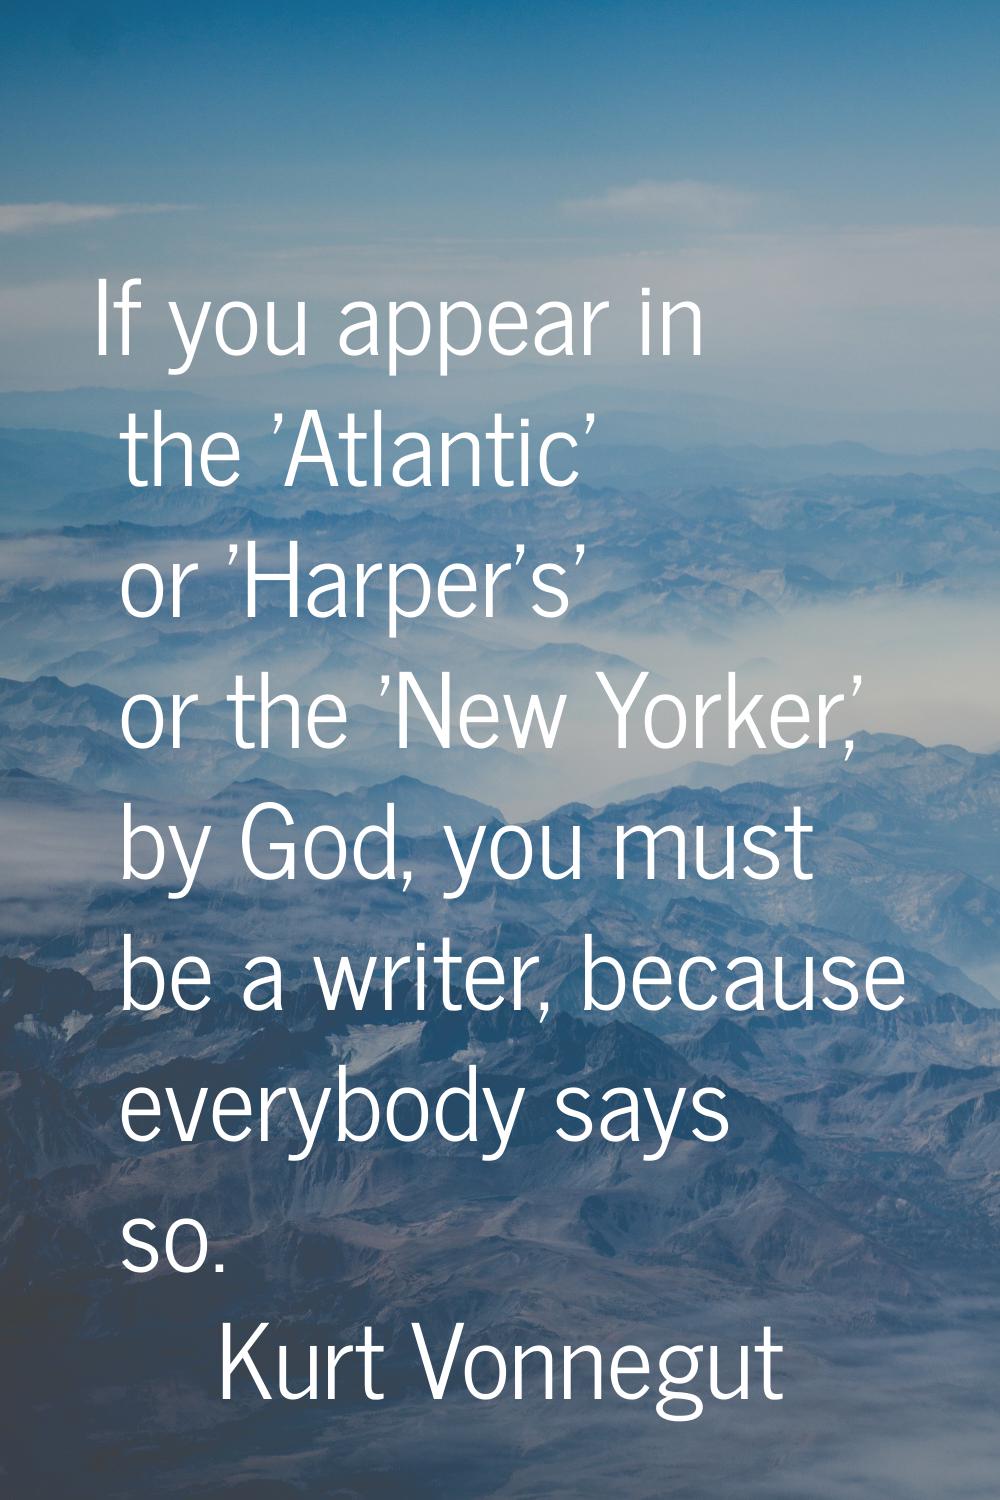 If you appear in the 'Atlantic' or 'Harper's' or the 'New Yorker,' by God, you must be a writer, be